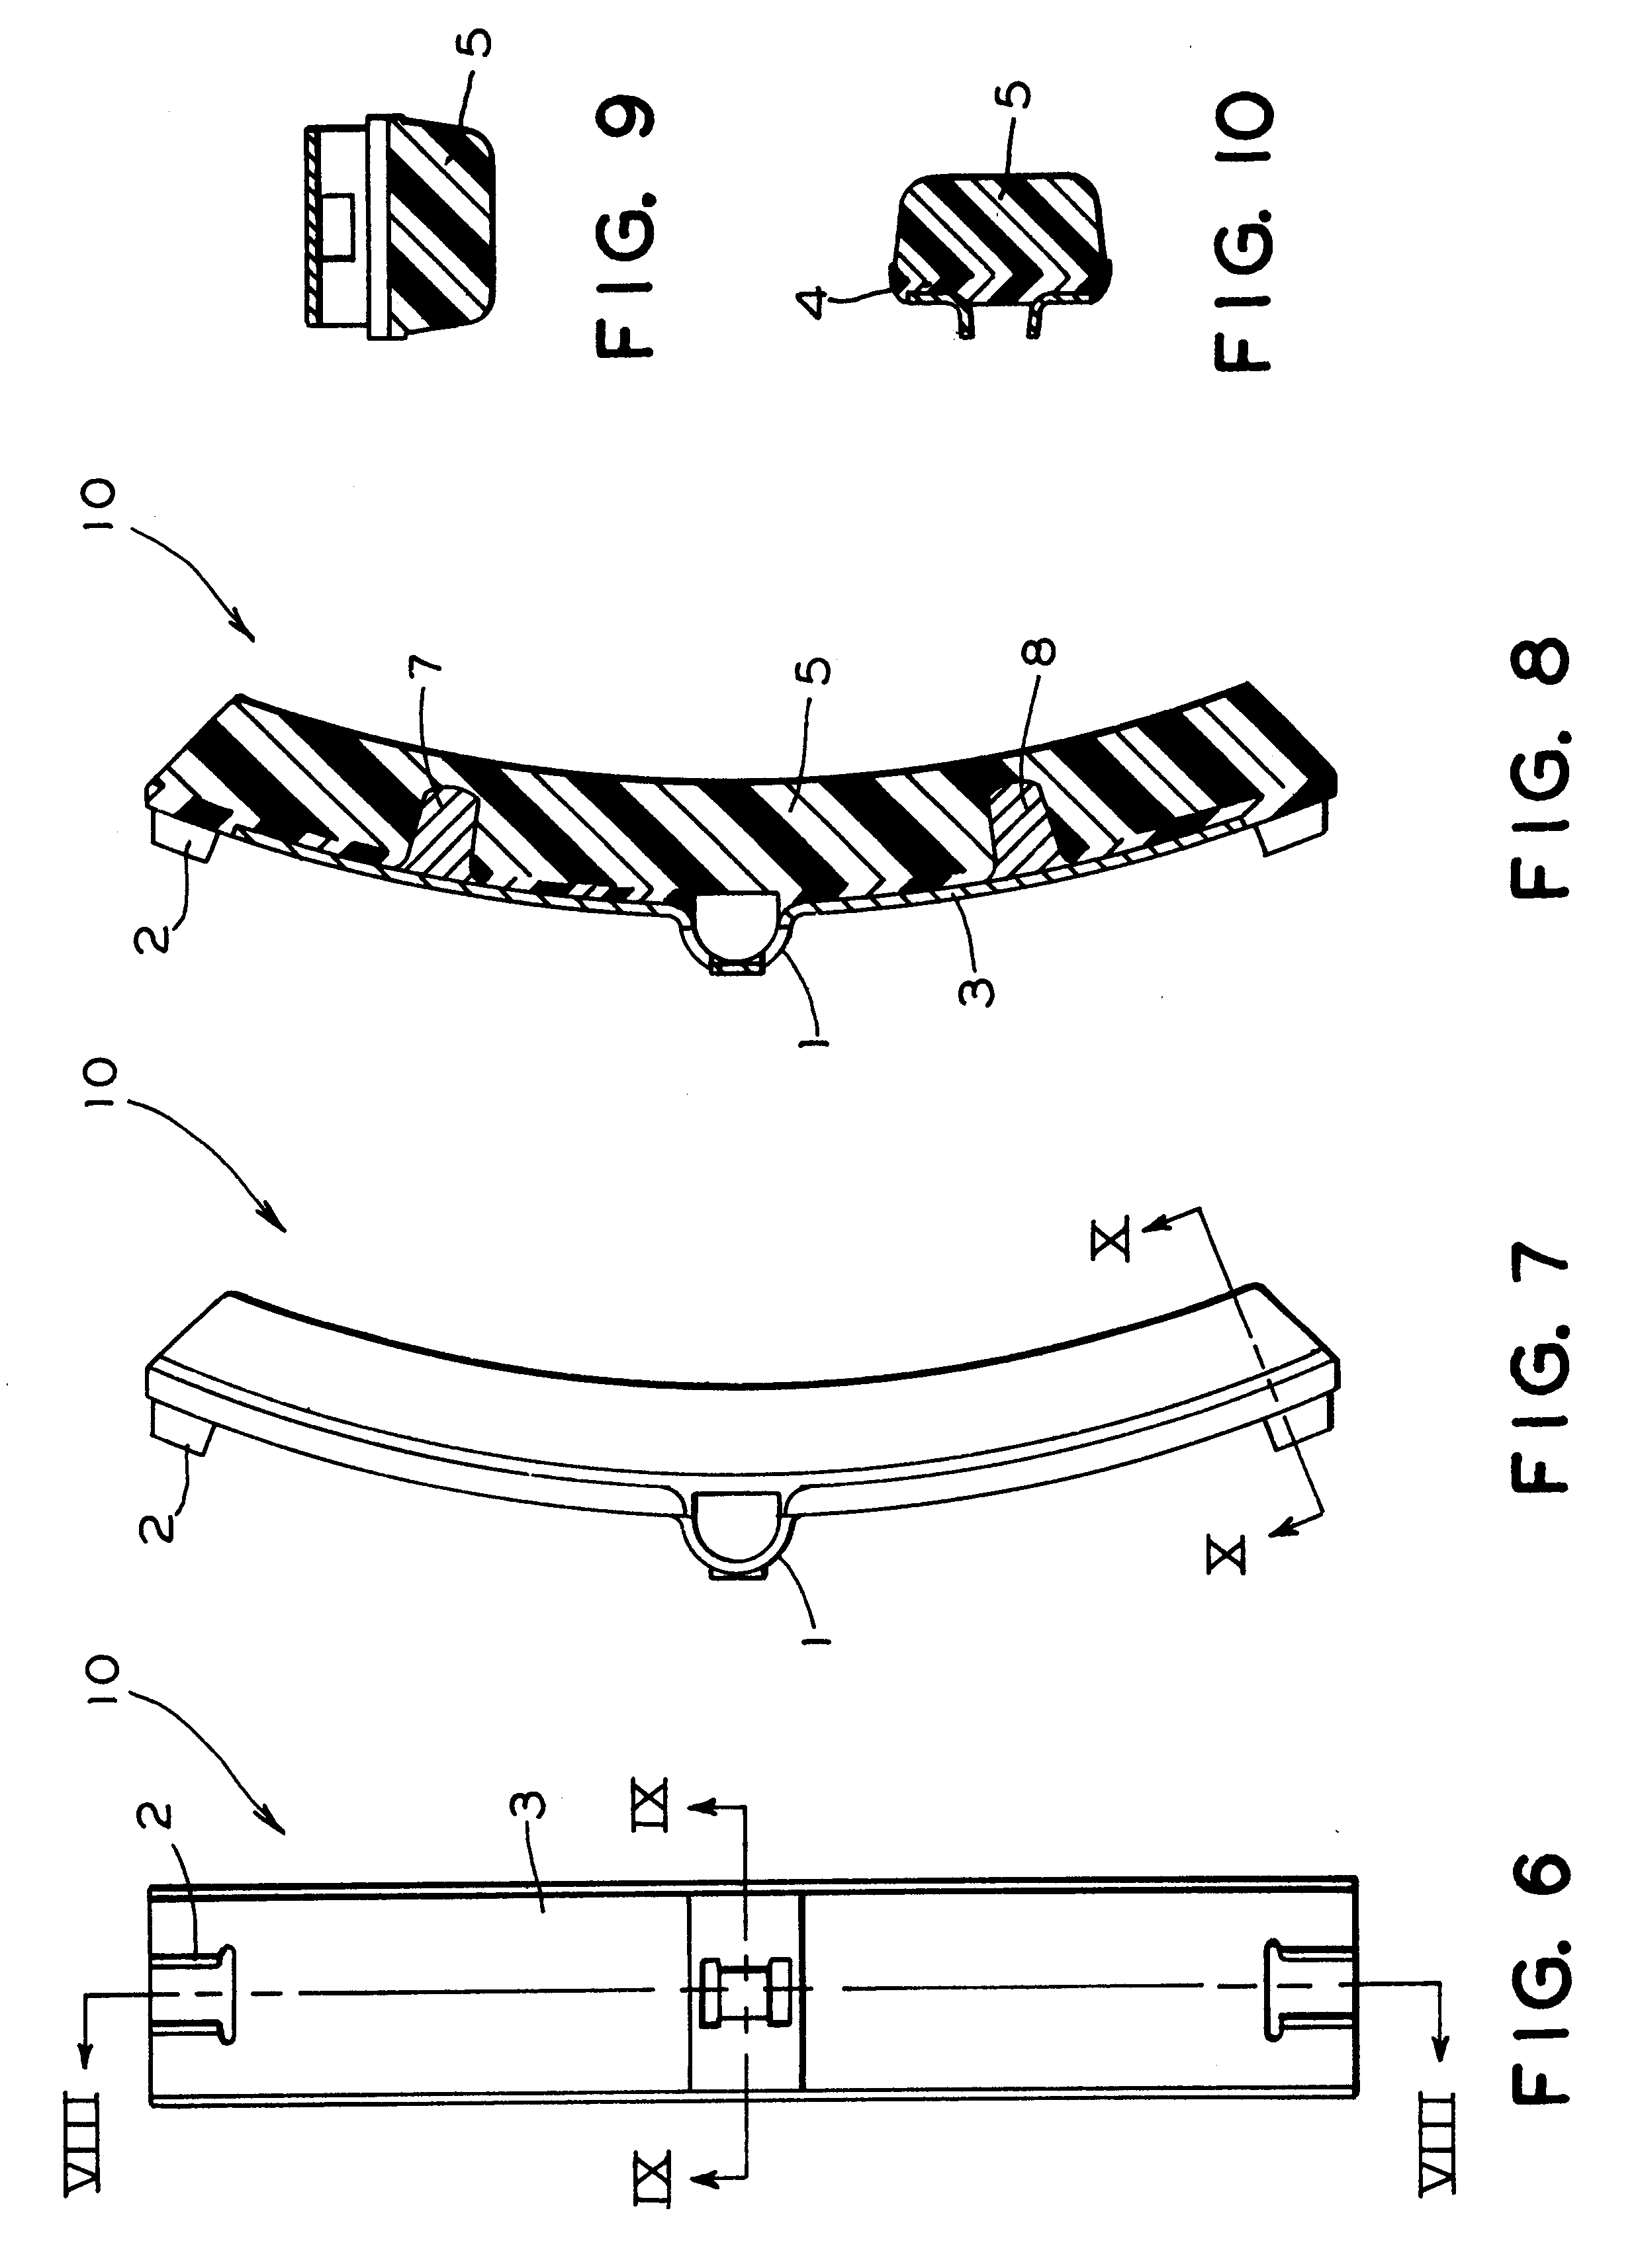 Brake shoe with insert bonded to backing plate